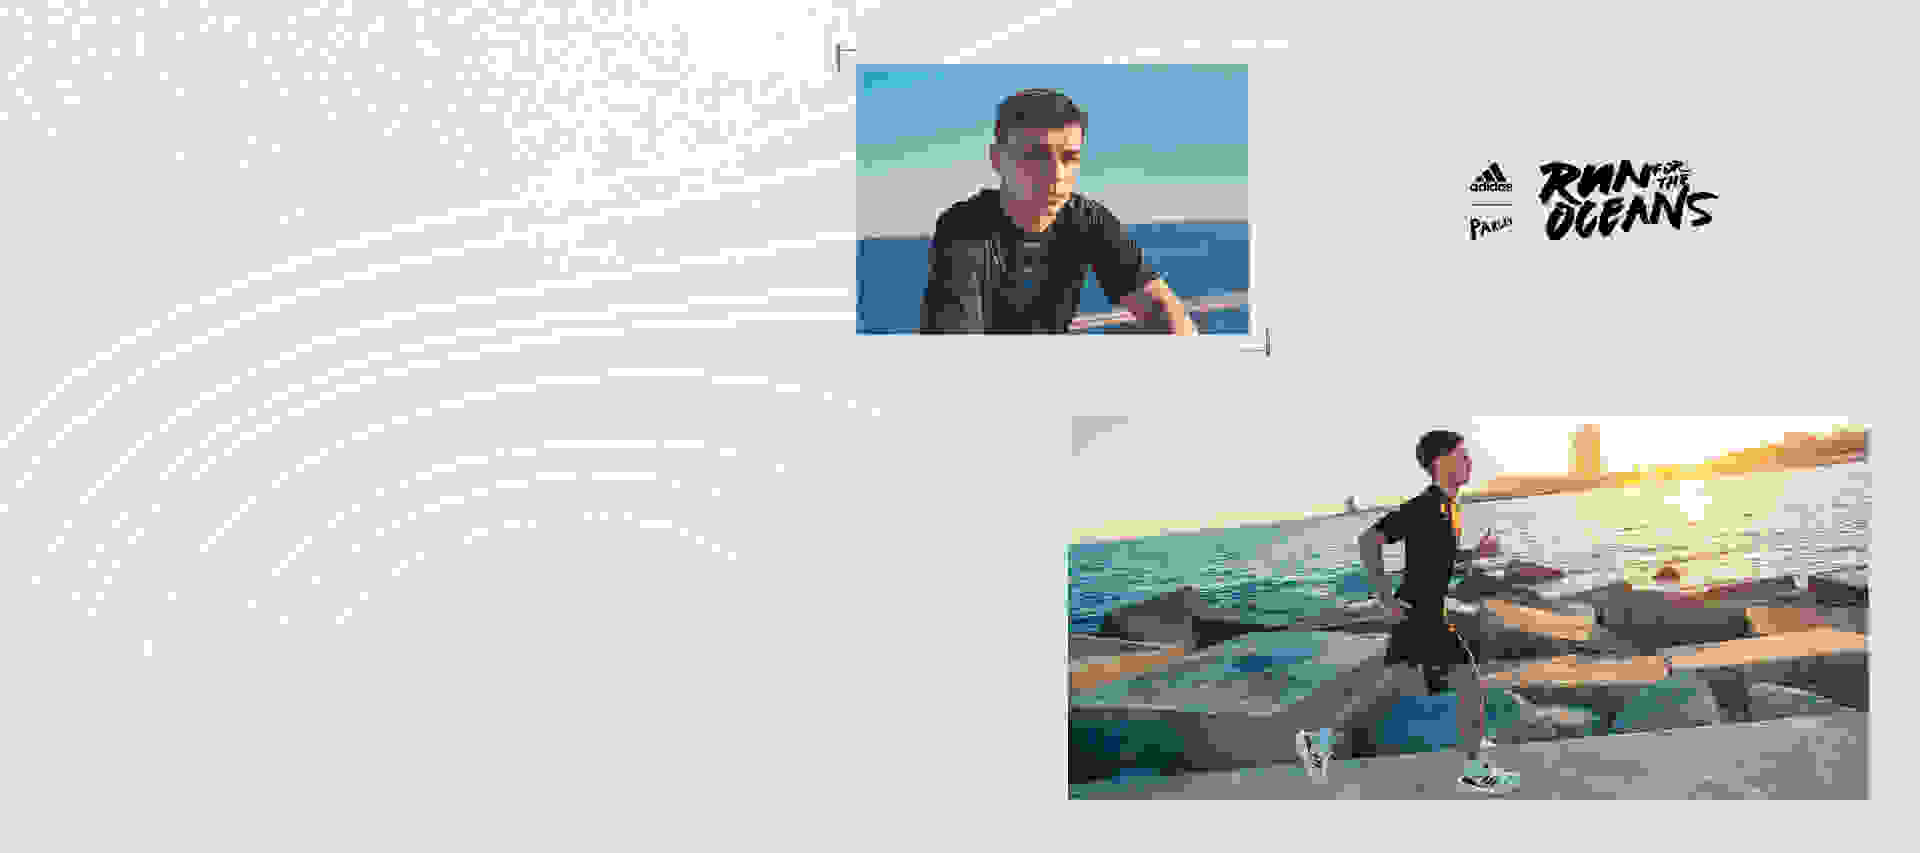 Composition with a visual of Pedri seated by the ocean and a visual of Pedri running by the ocean